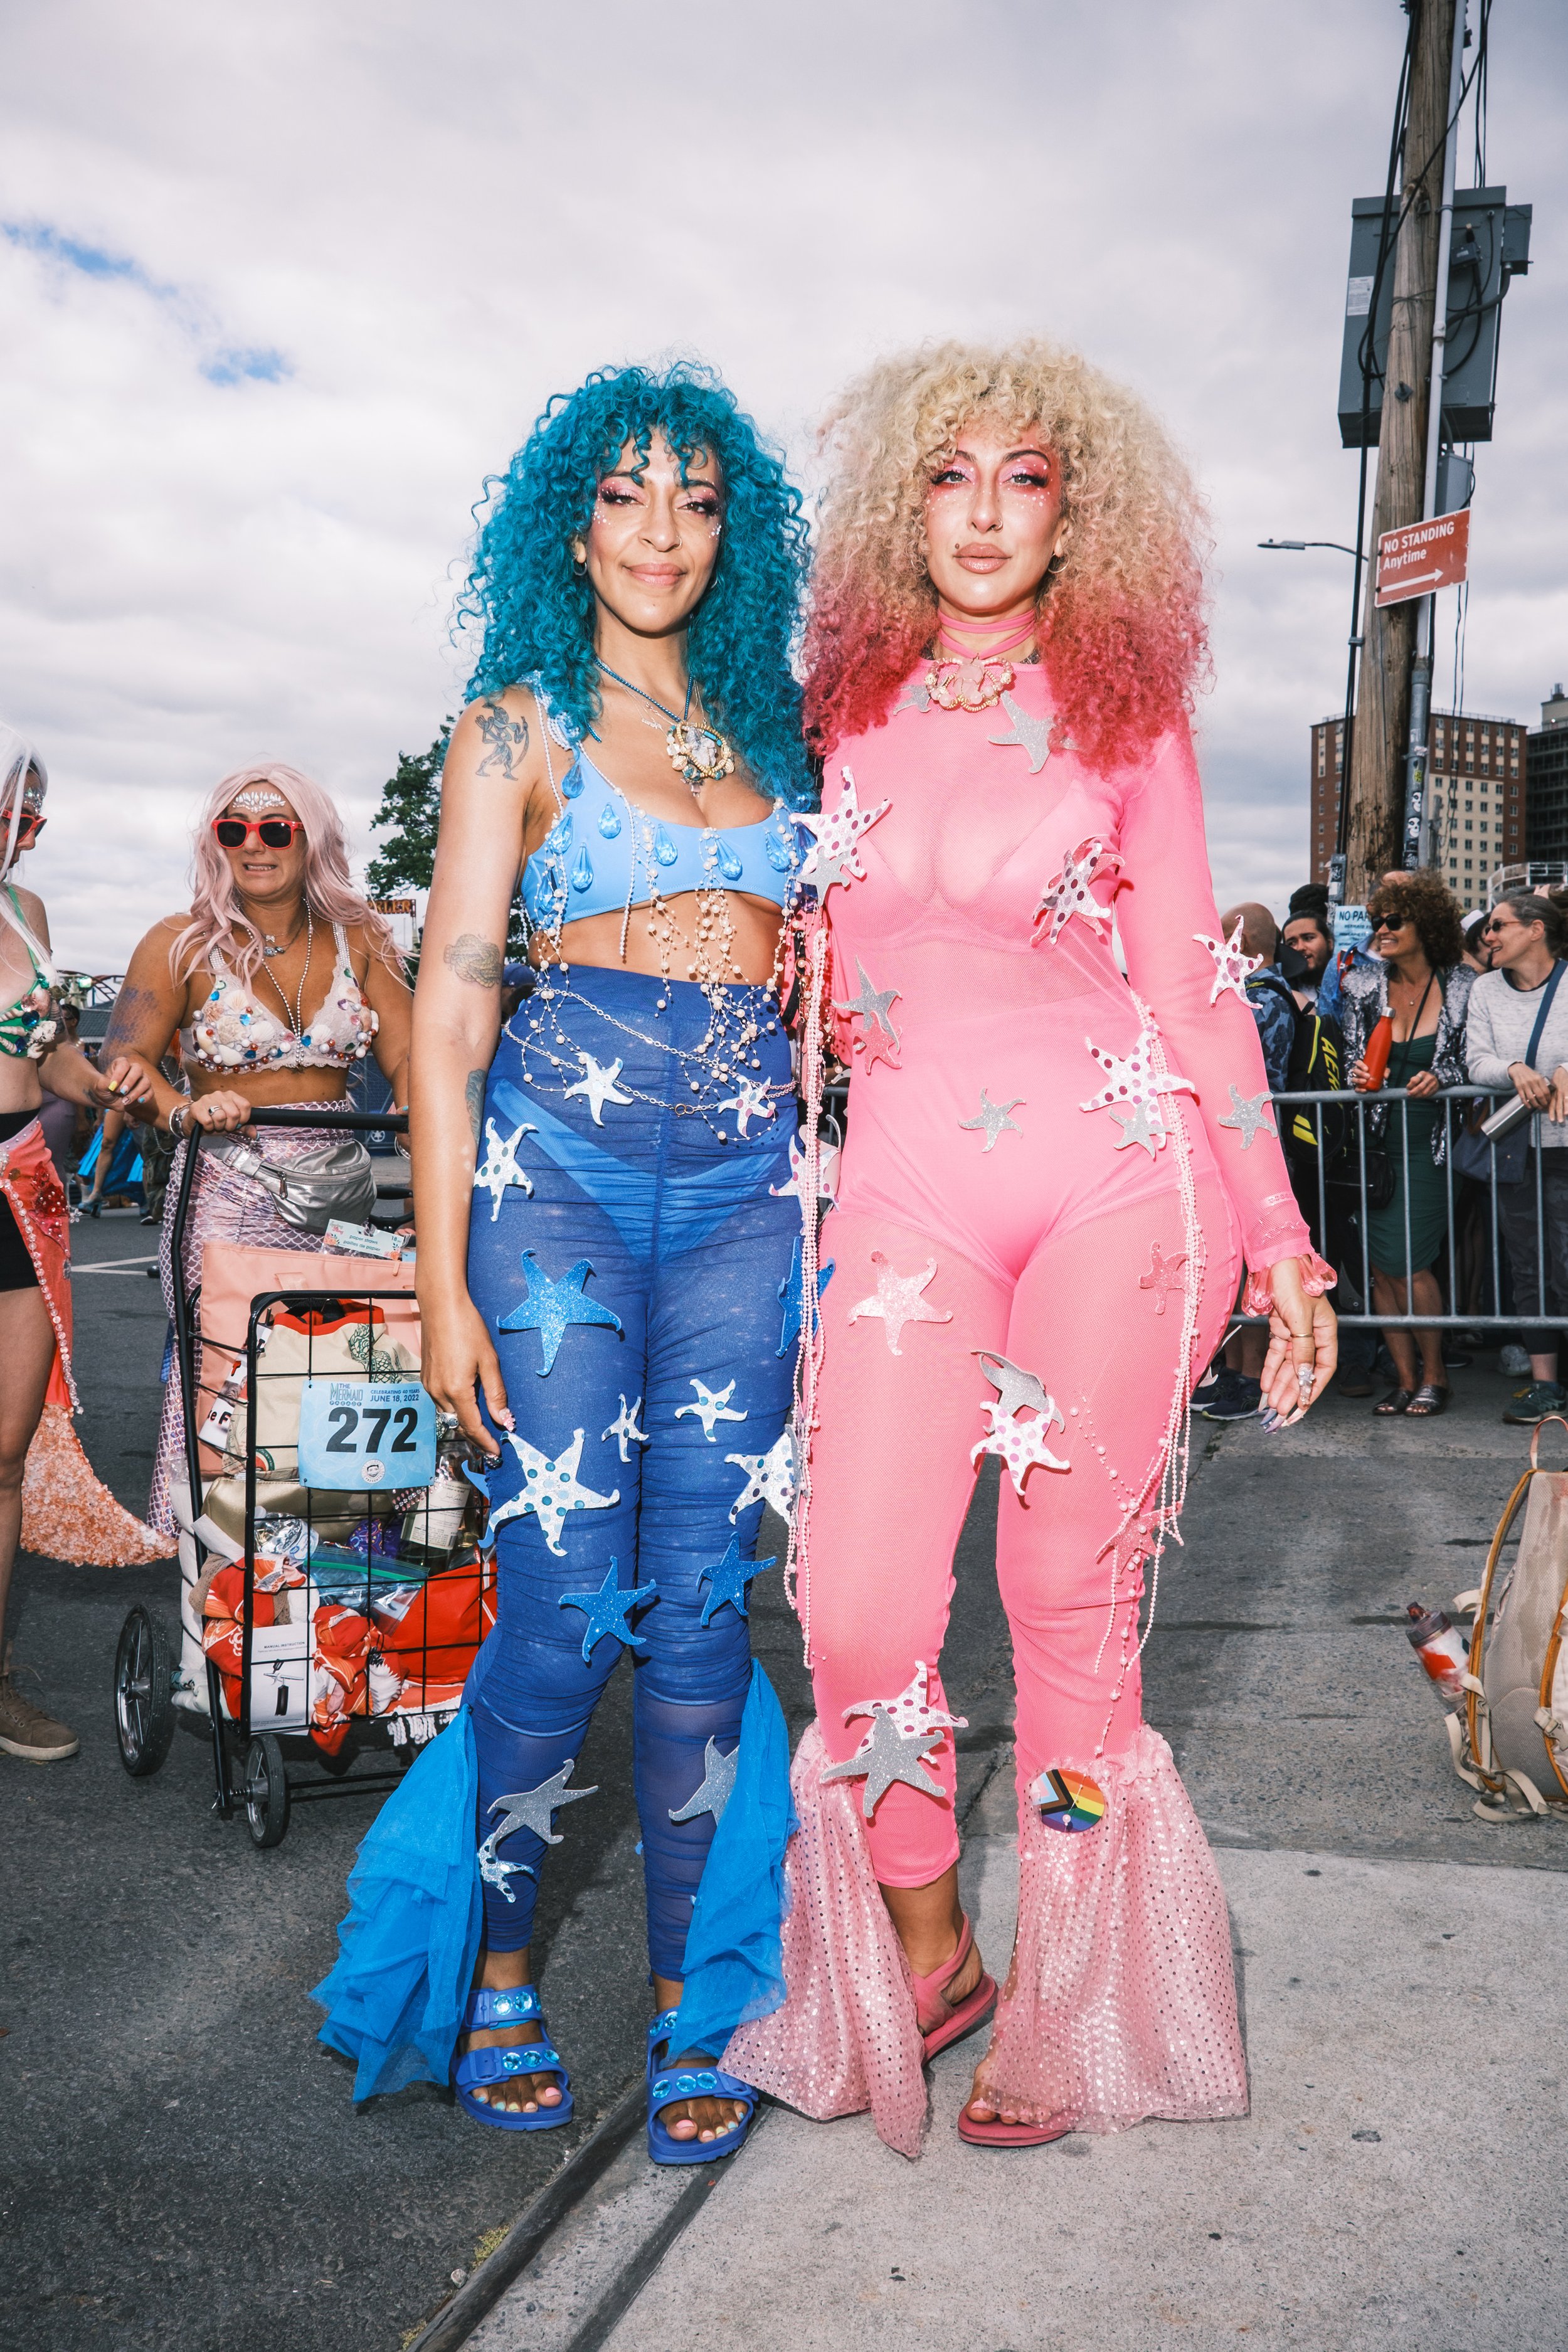  Twins at the Mermaid Day parade in Coney Island 